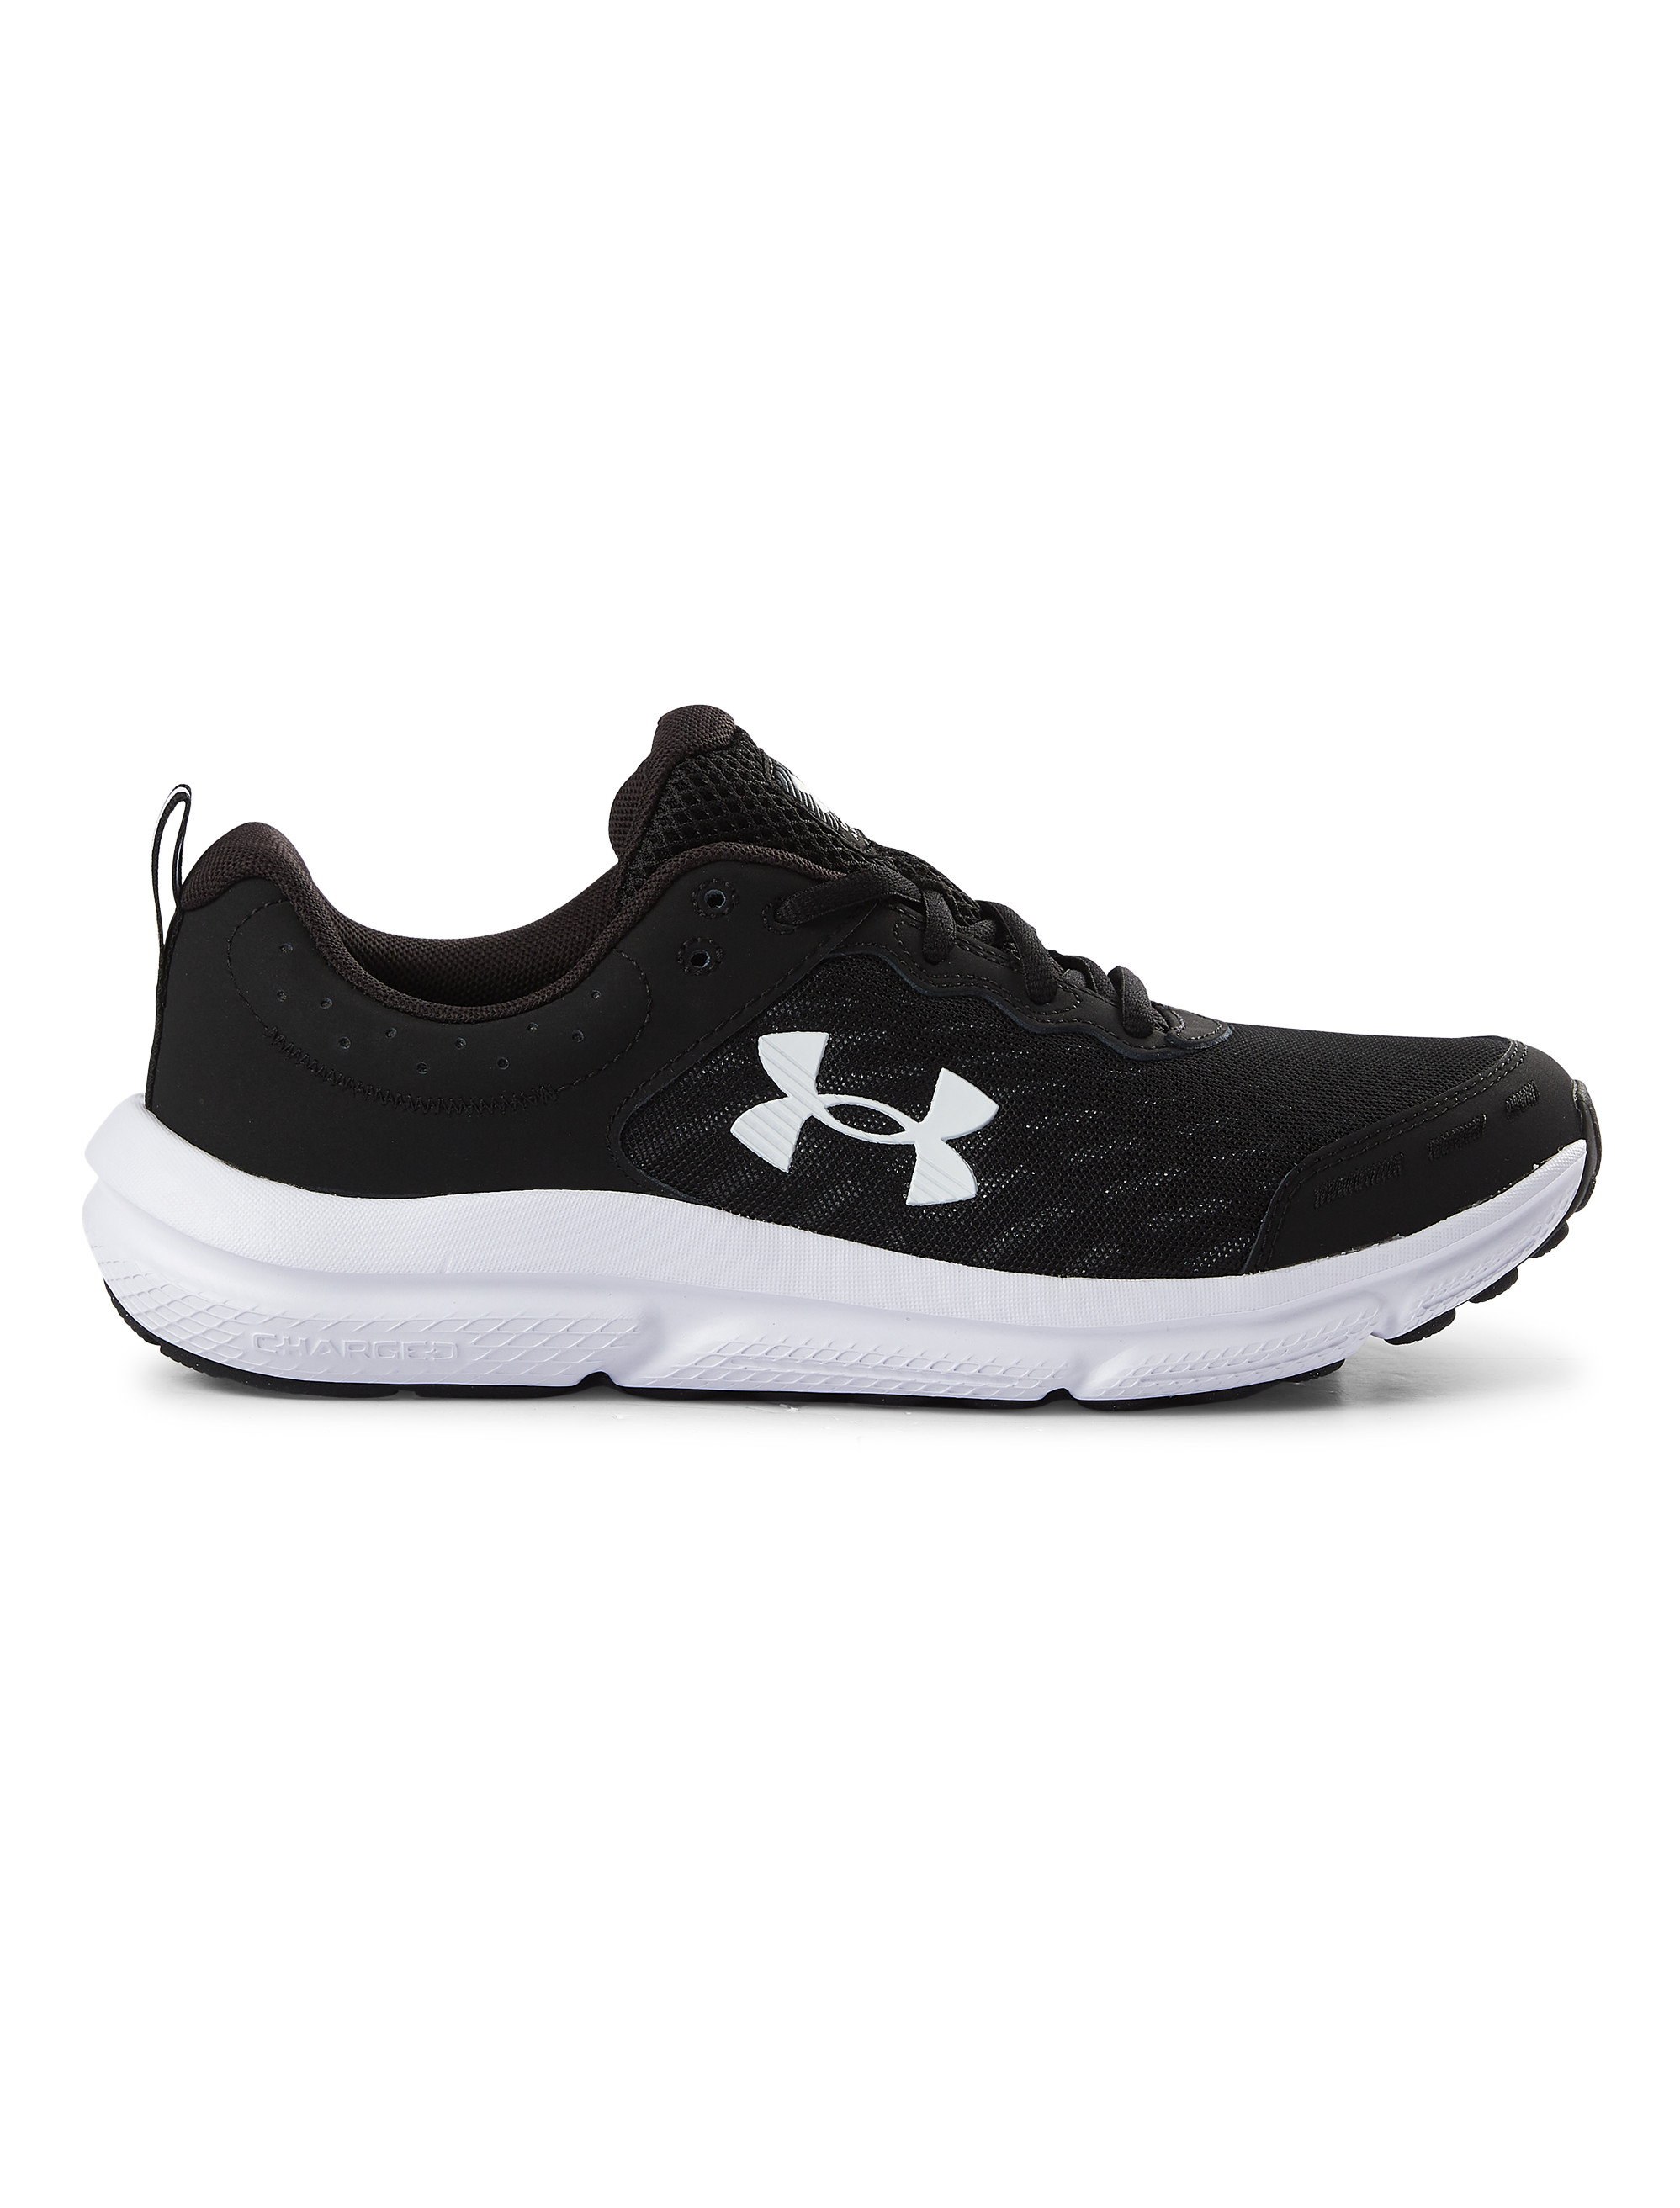 Under Armour Charged Assert 9 Mens Black Lace Up Running Shoes Size 14 Used